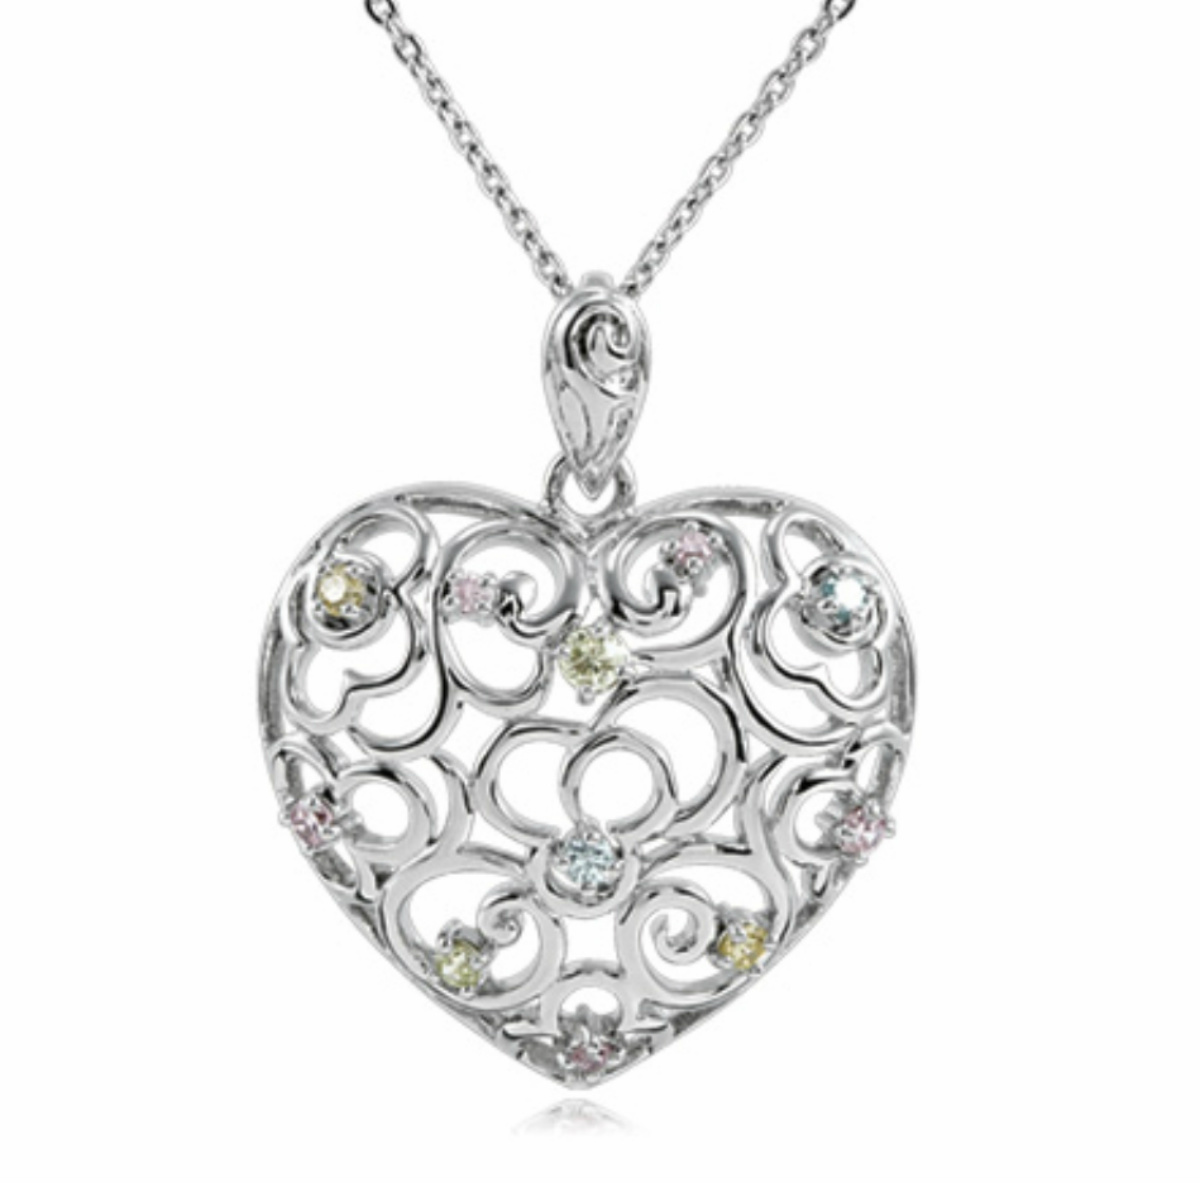 CZ 'Desires of the Heart' Rhodium Plate Sterling Silver Filigree Pendant Necklace.